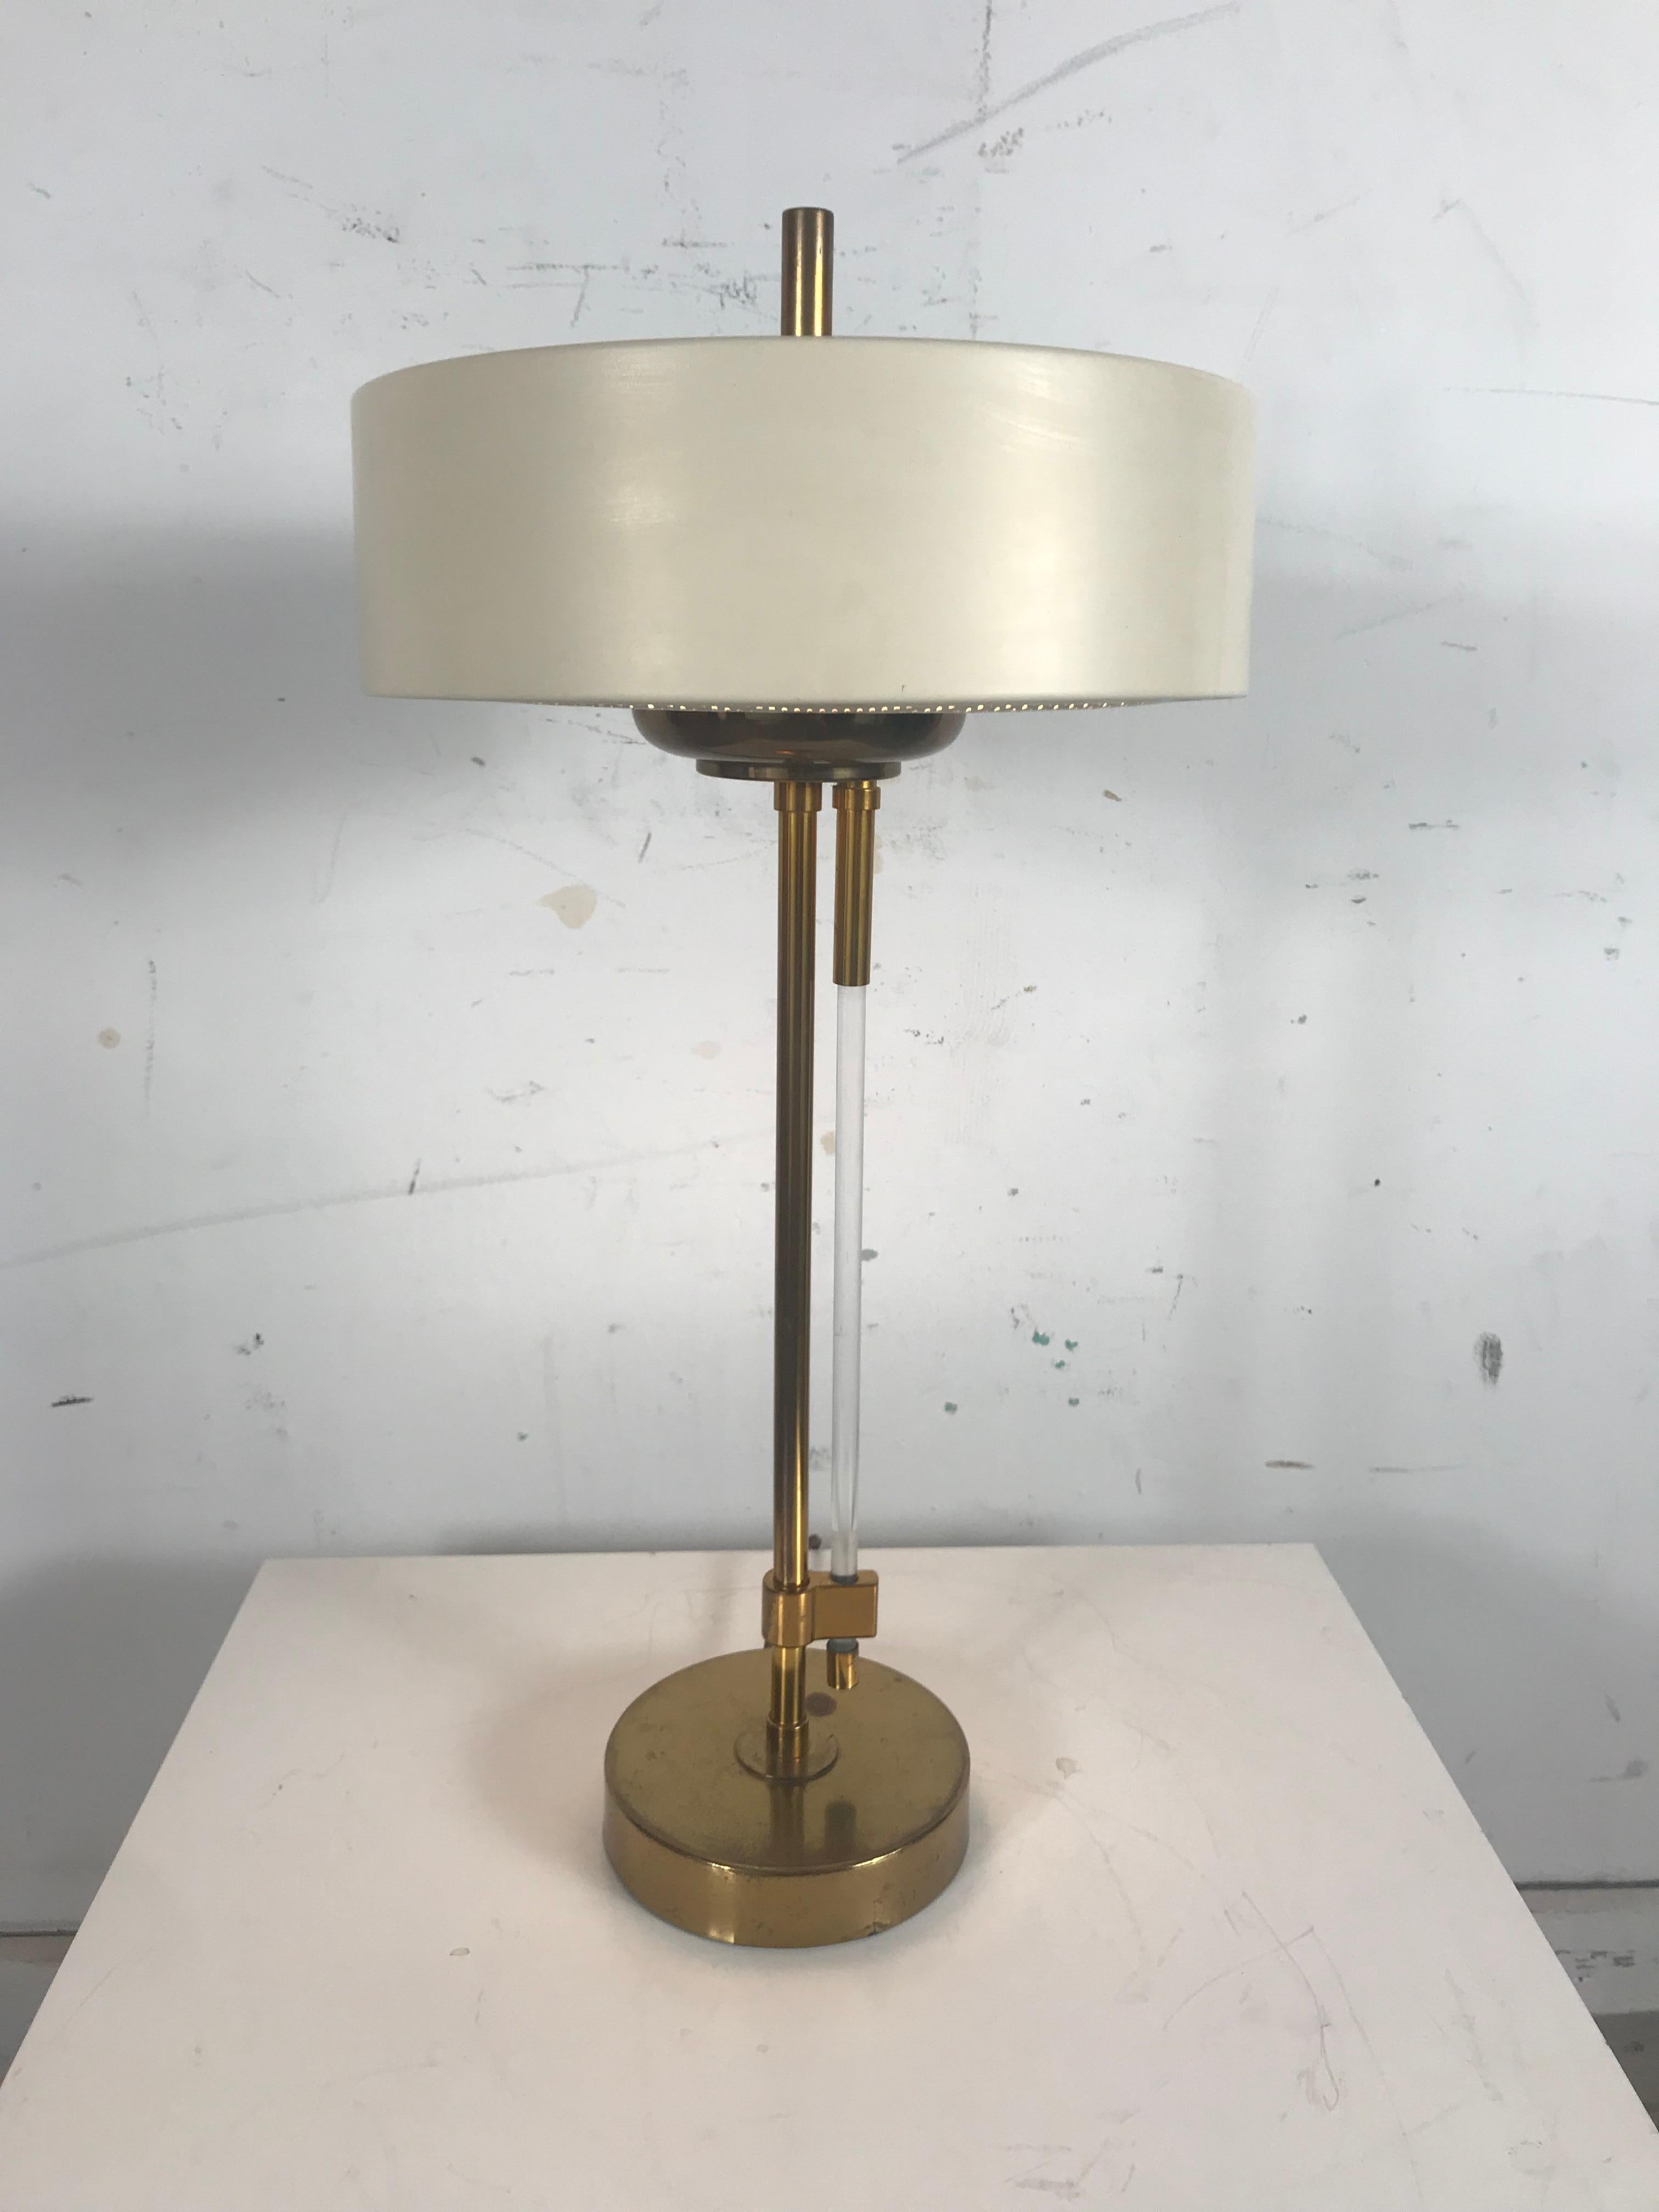 Stunning Modernist Brass, Painted Metal and Lucite Lamp by Mutual Sunset Lamp Co 1